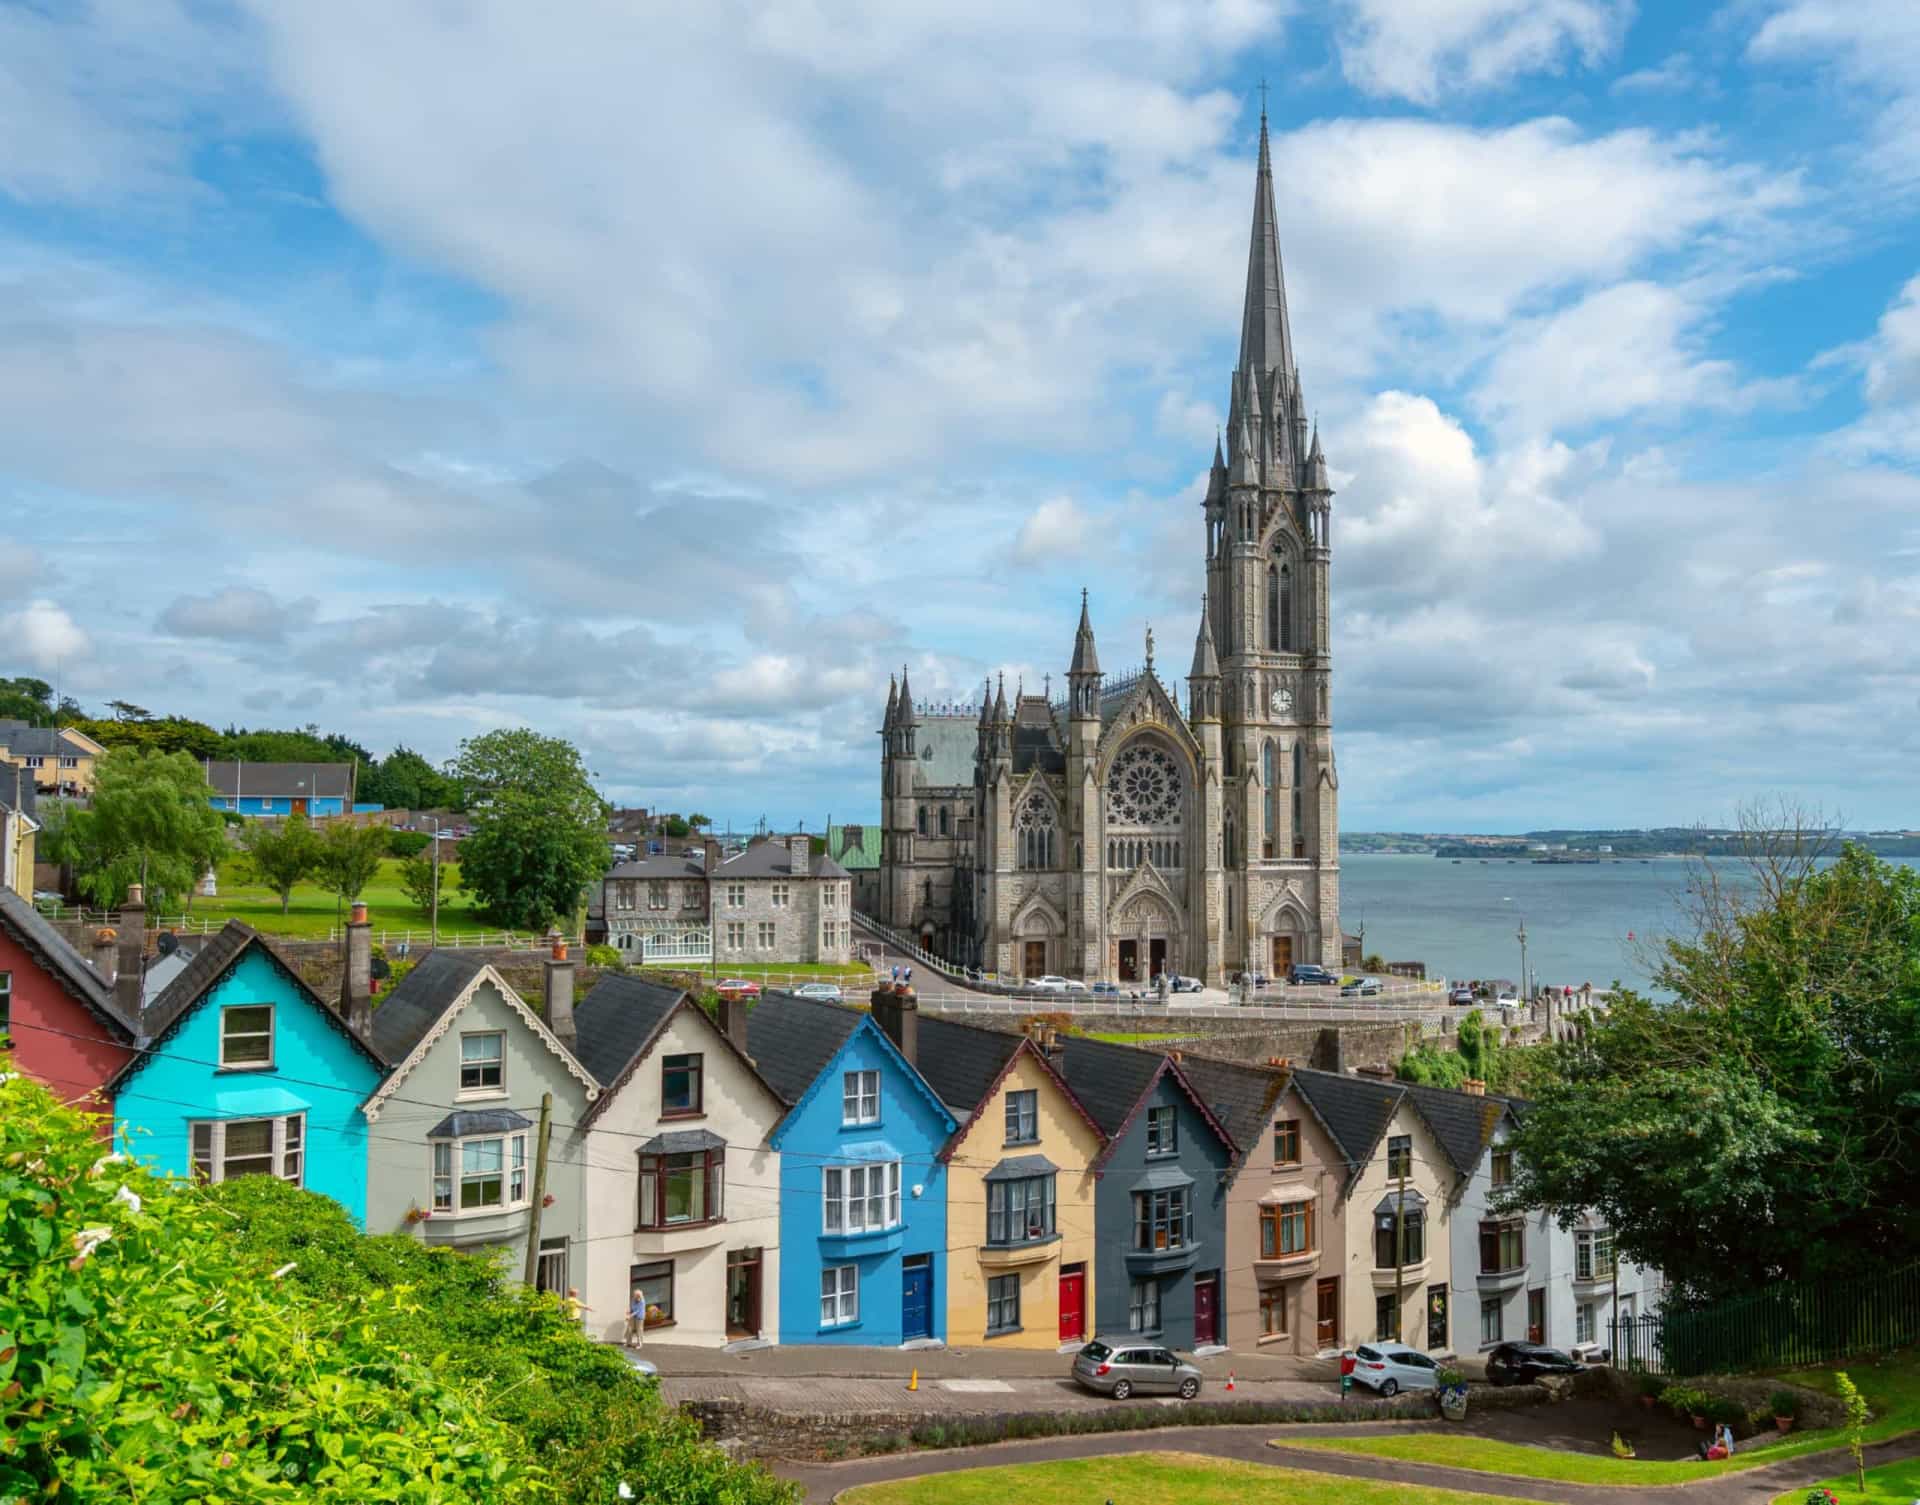 <p>The lofty spire of St Colman's Cathedral dominates the Cobh skyline, the second-tallest in Ireland, behind St John's Cathedral in Limerick. Cobh, incidentally, is where Annie Moore and her brothers departed from, bound for America. She was the first immigrant to the United States to pass through federal immigrant inspection at the Ellis Island station in New York Harbor.</p>